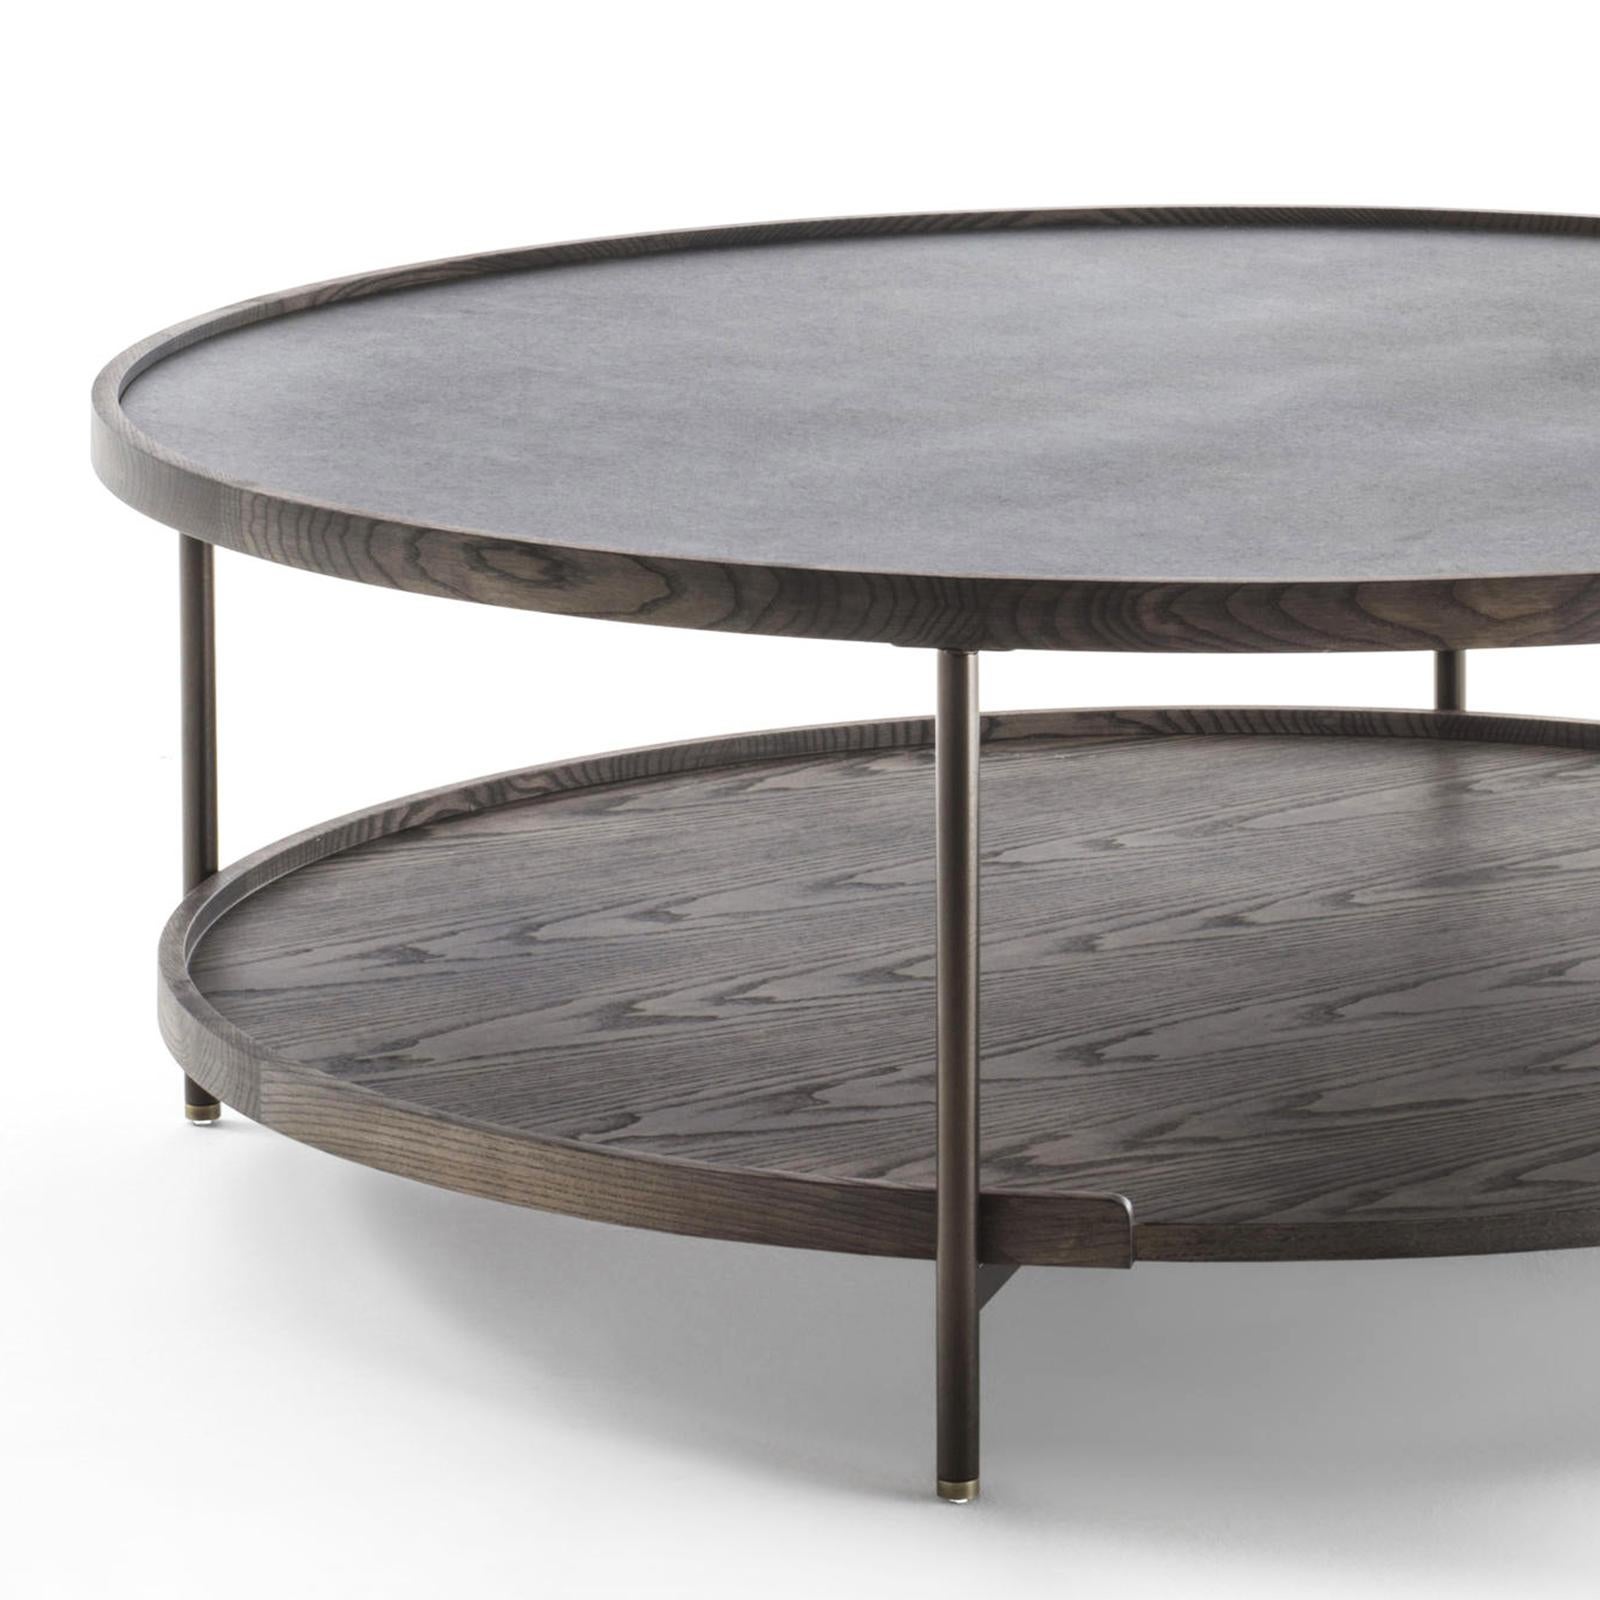 Coffee table Kart round with metal structure
in bronzage finish. With down top in solid ash wood
and upper top in rock. End of the feet are in brushed
bronzed brass.
   